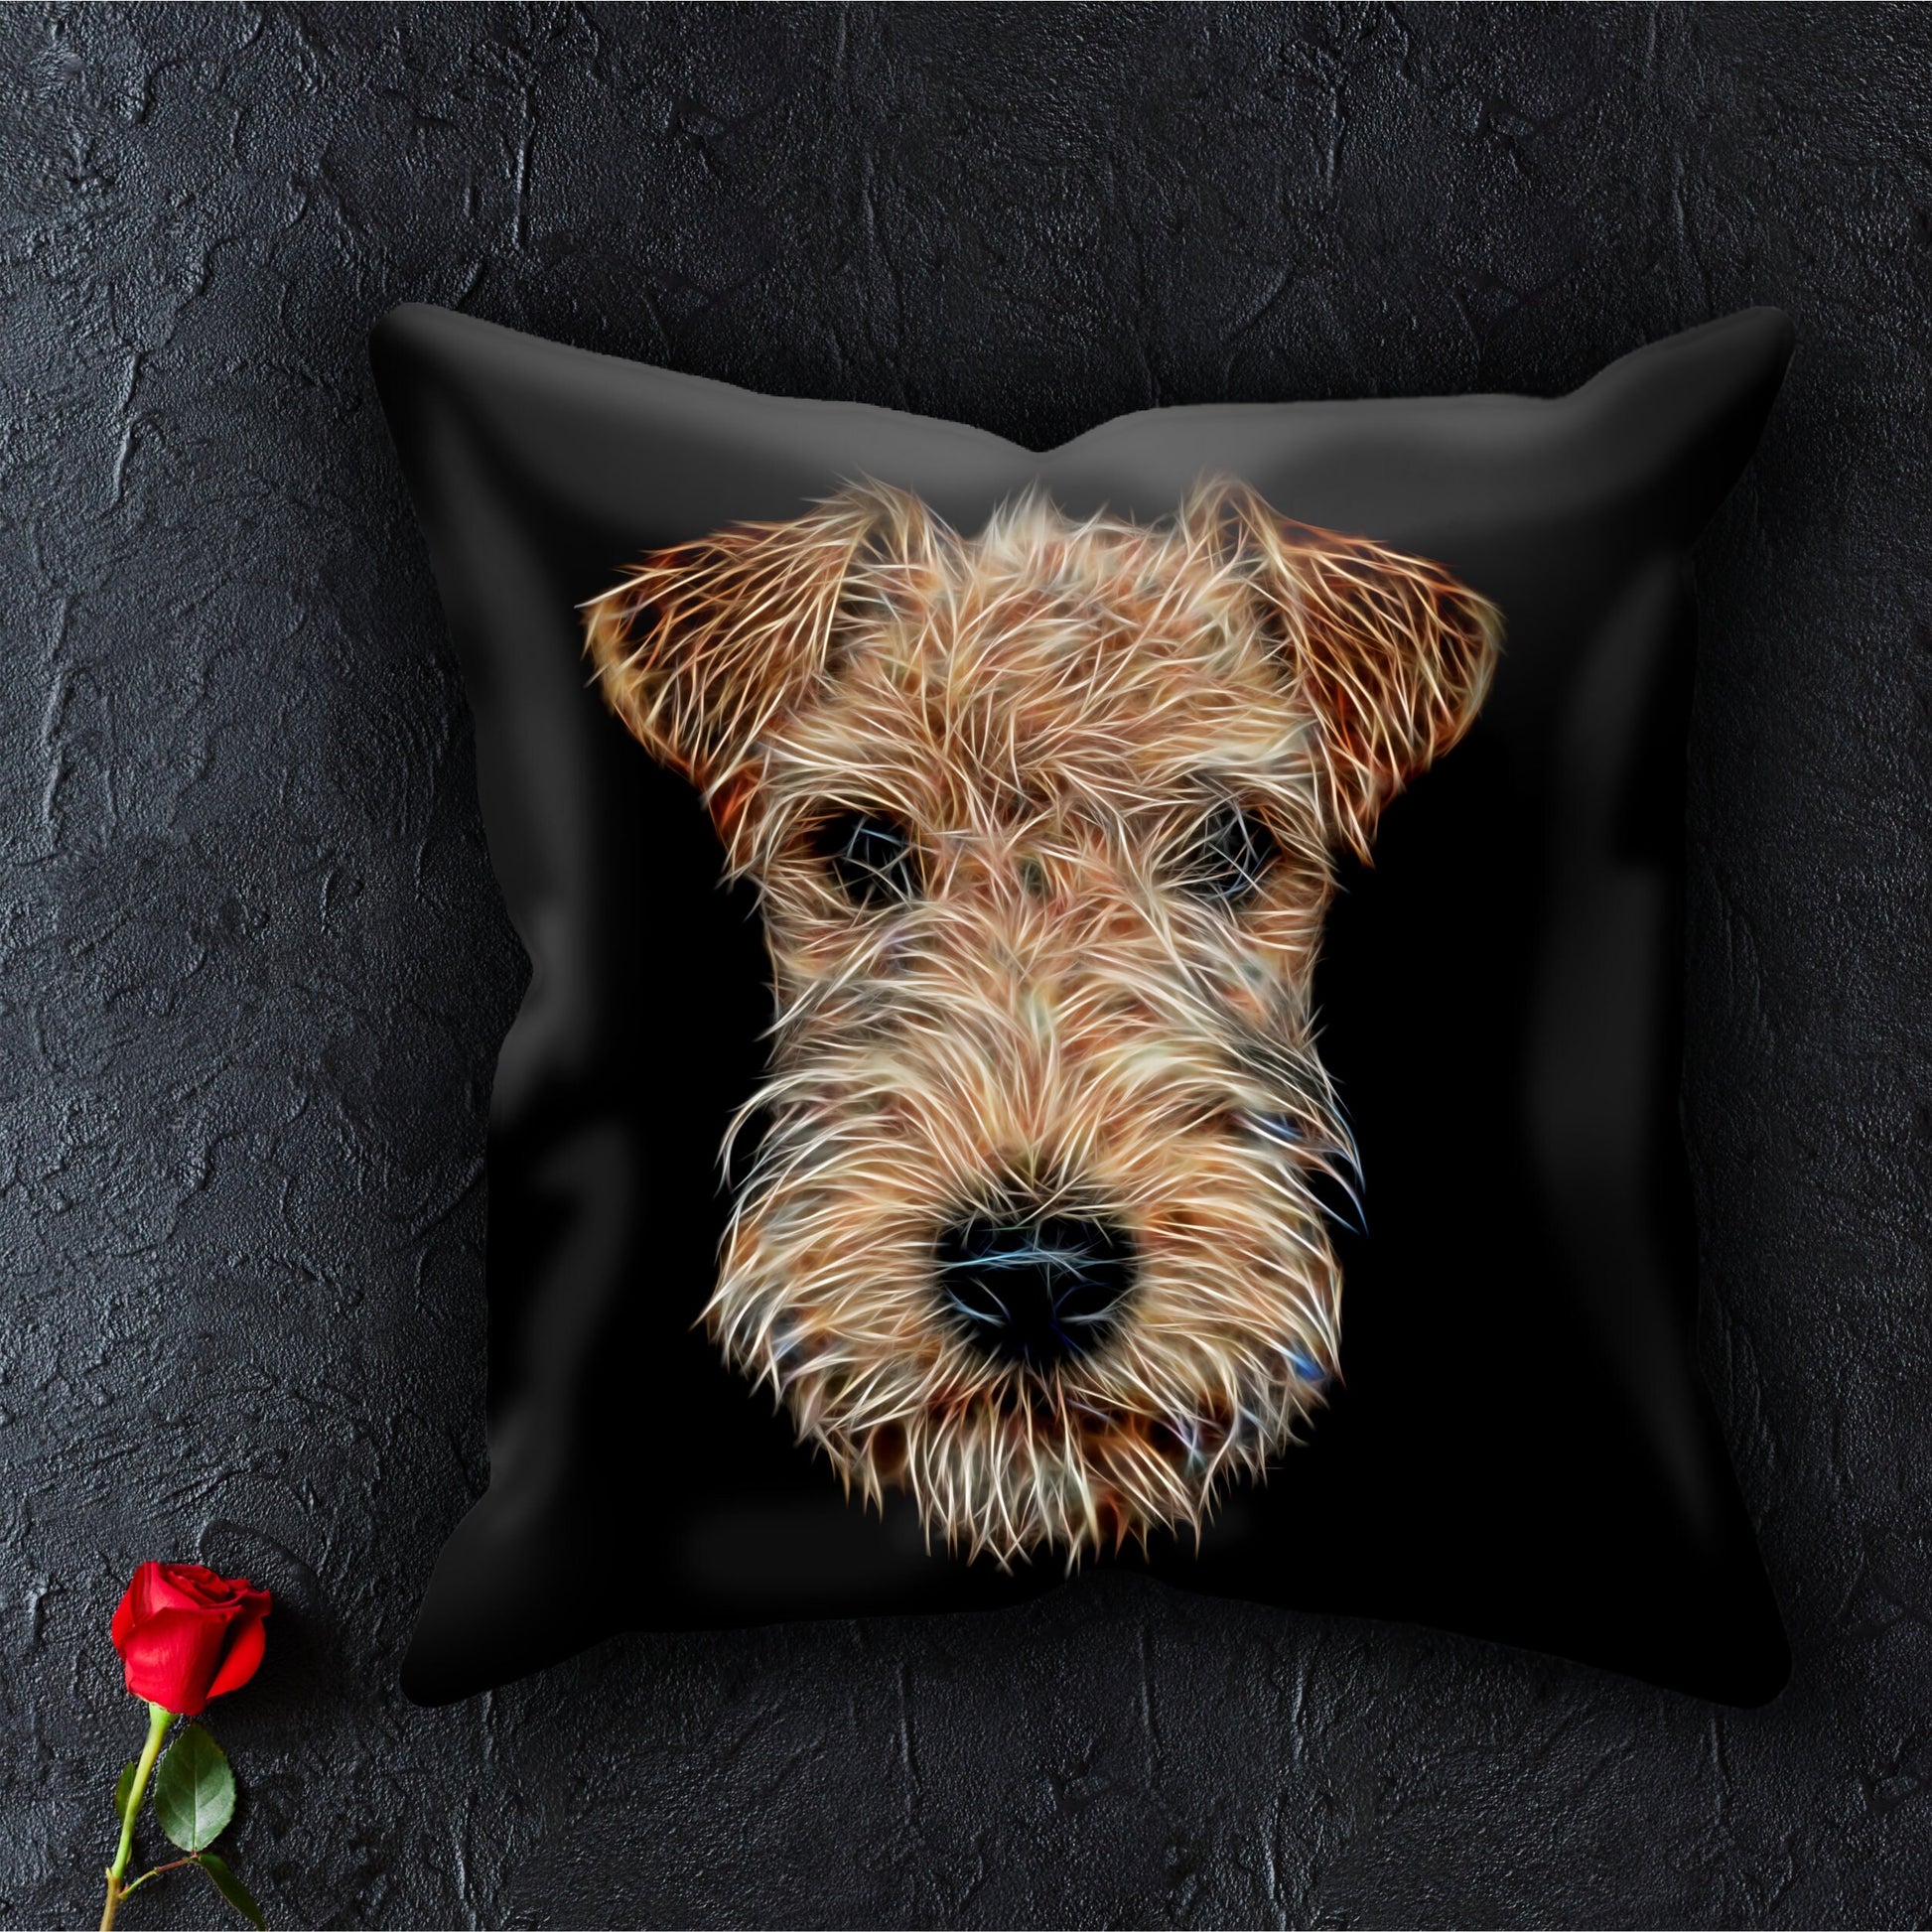 Lakeland Terrier Cushion with Insert